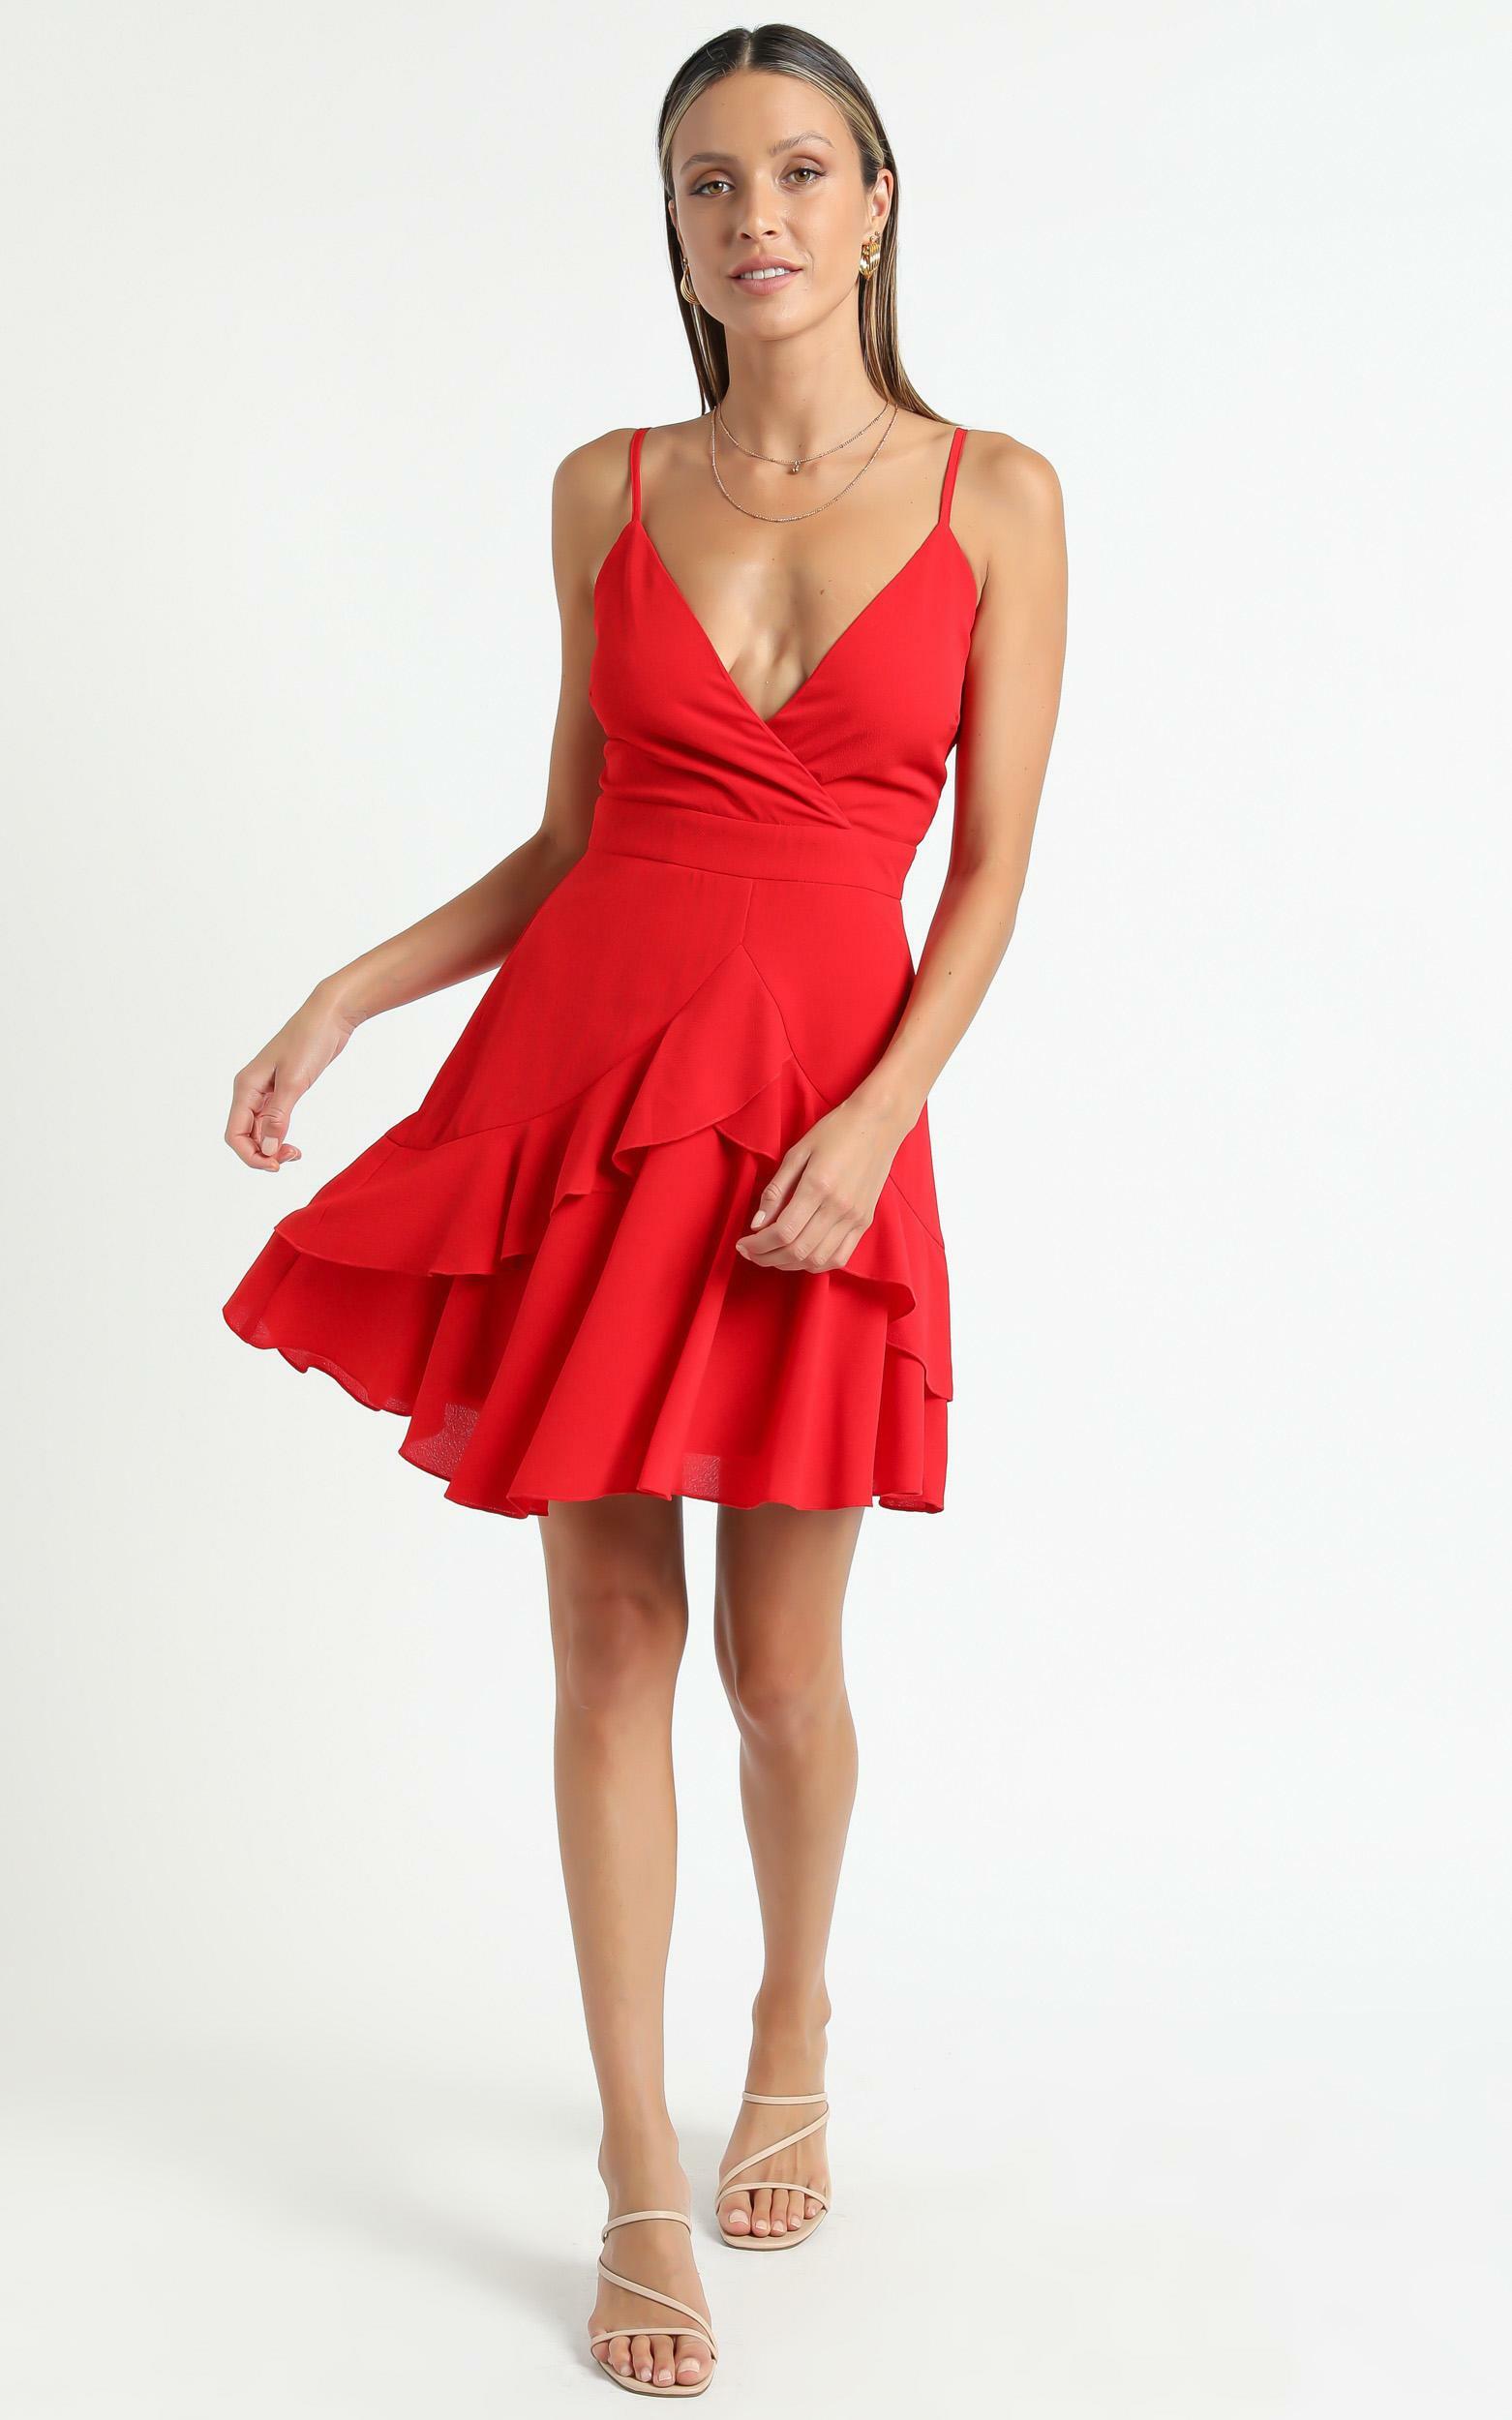 Feels Like Love Dress in Red - 06, RED5, hi-res image number null